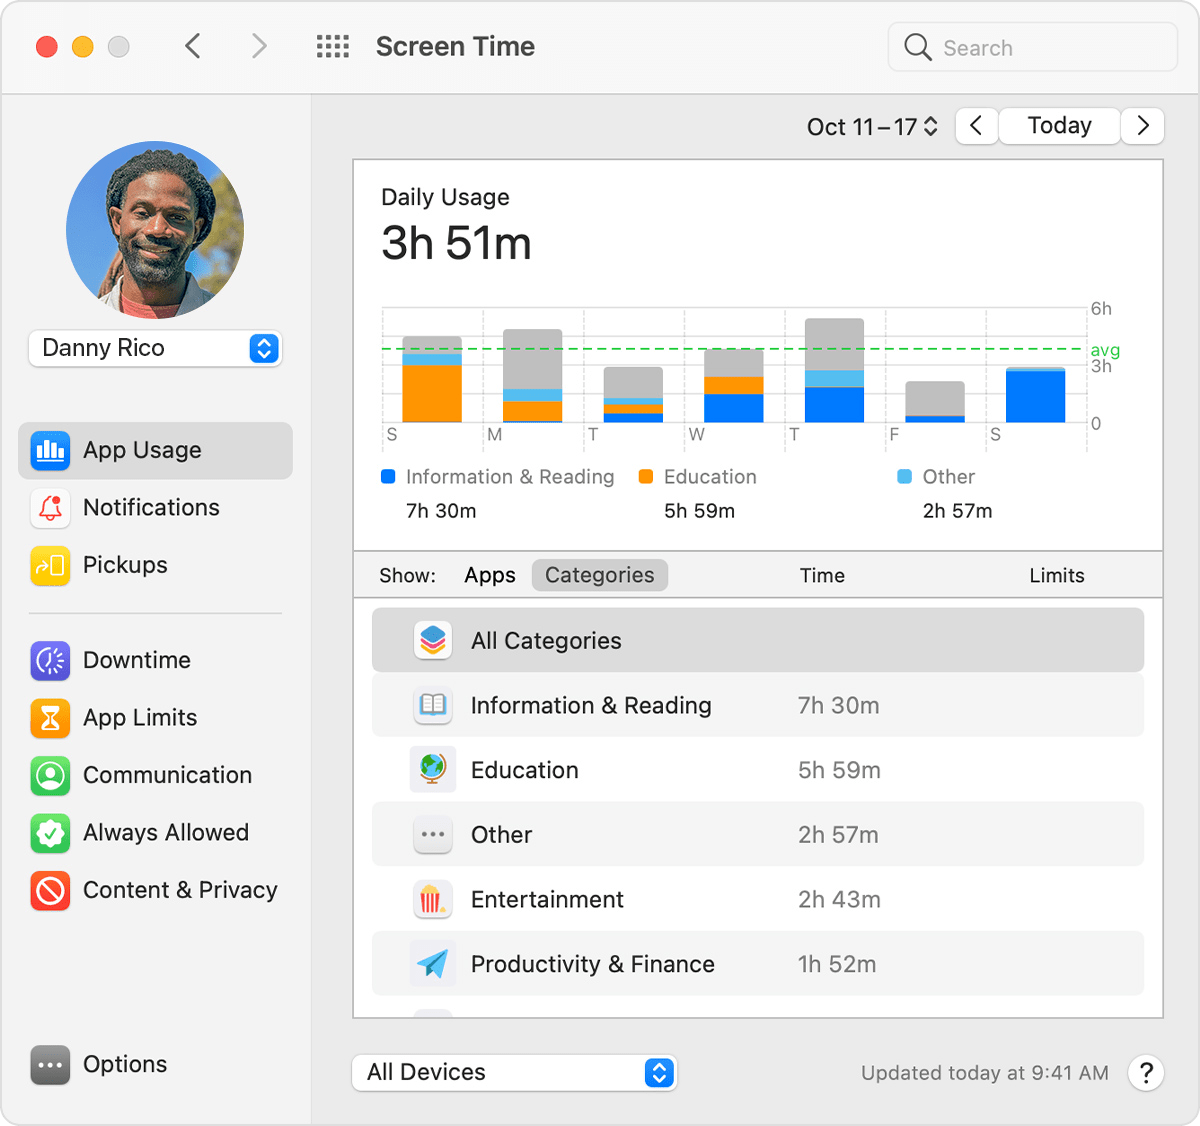 Screen Time preferences: App Usage